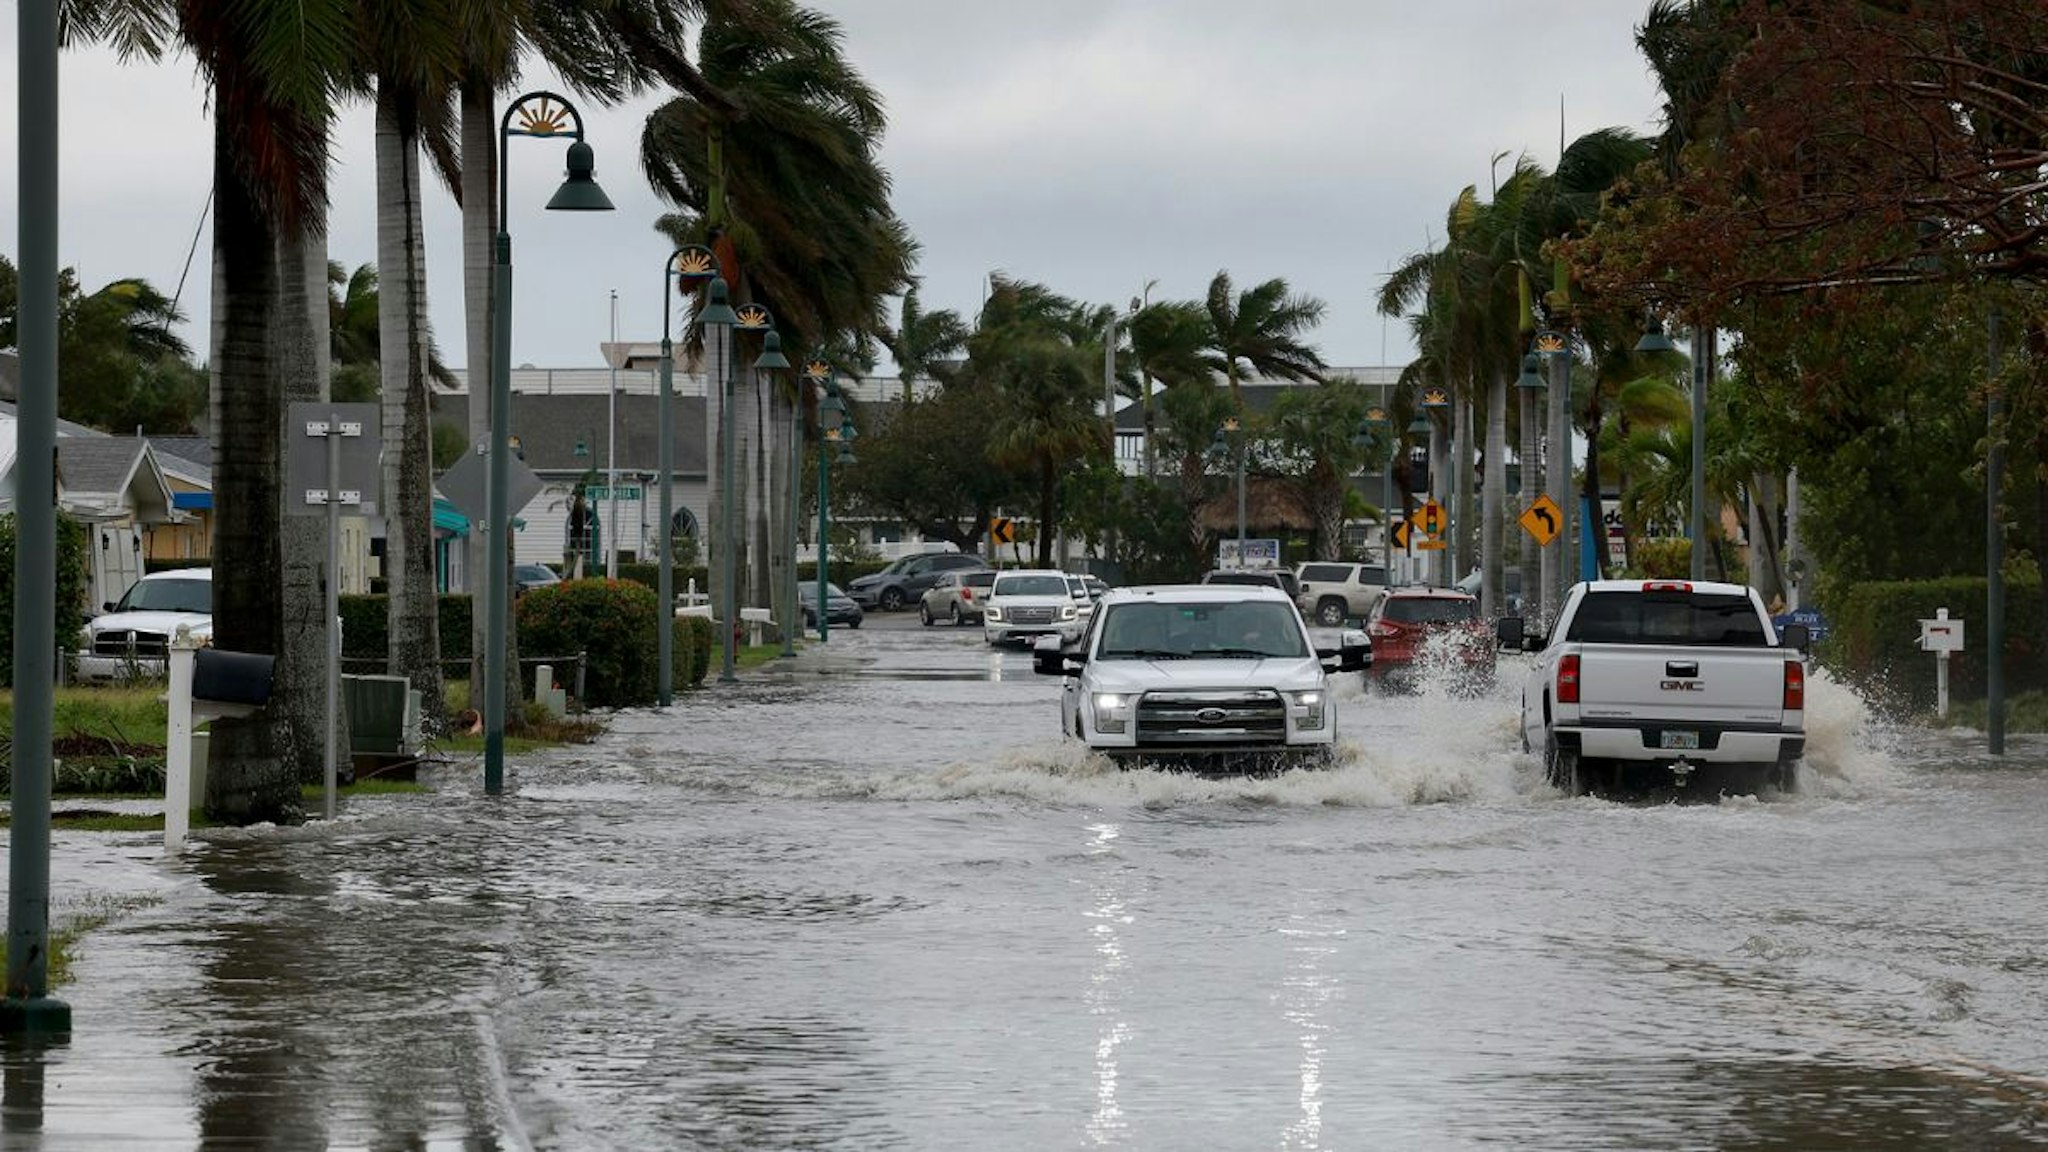 Vehicles drive through a flooded street after Hurricane Nicole came ashore on November 10, 2022 in Fort Pierce, Florida.